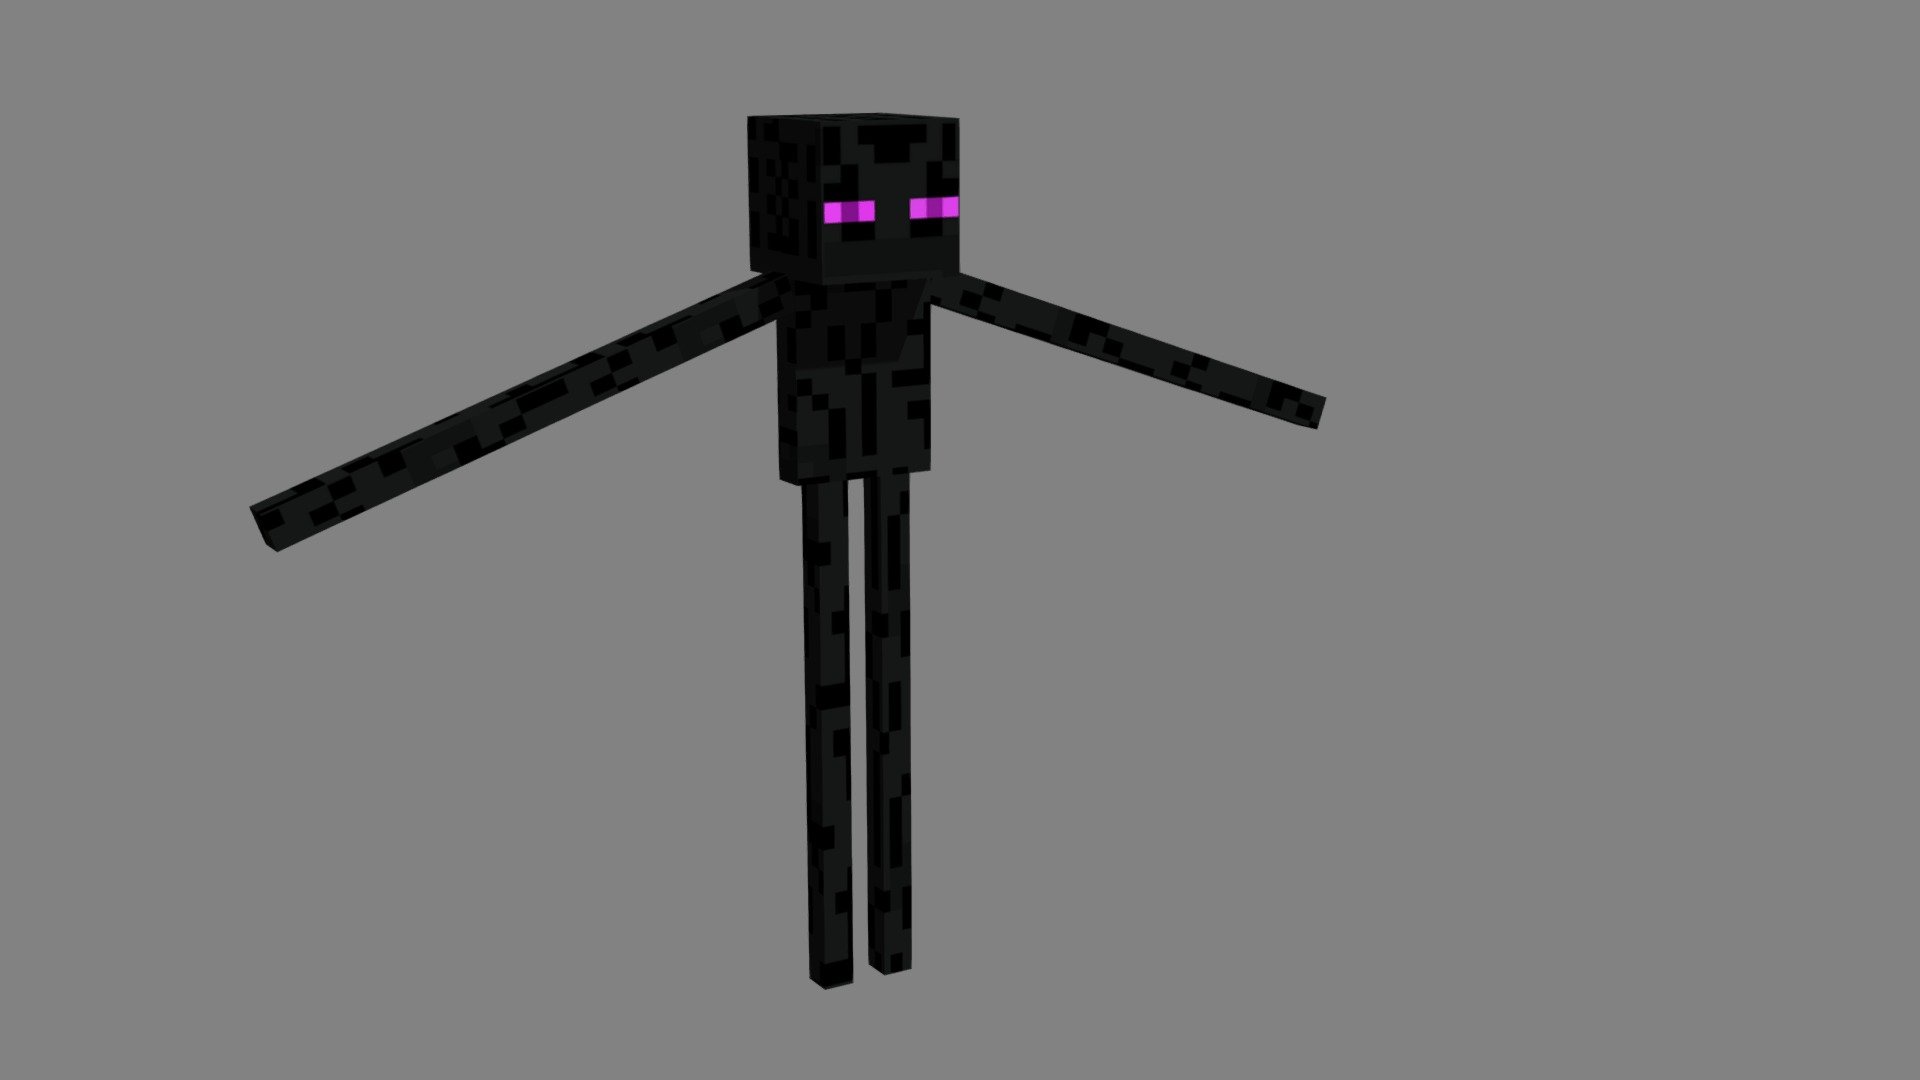 This is my first VRChat prepared model.
I will keep adding more models every week and start doing comissions later on.
I hope you like it :P - Enderman - Download Free 3D model by Samuel Candin Cuadros Bolaños (@Amasacrator1) 3d model